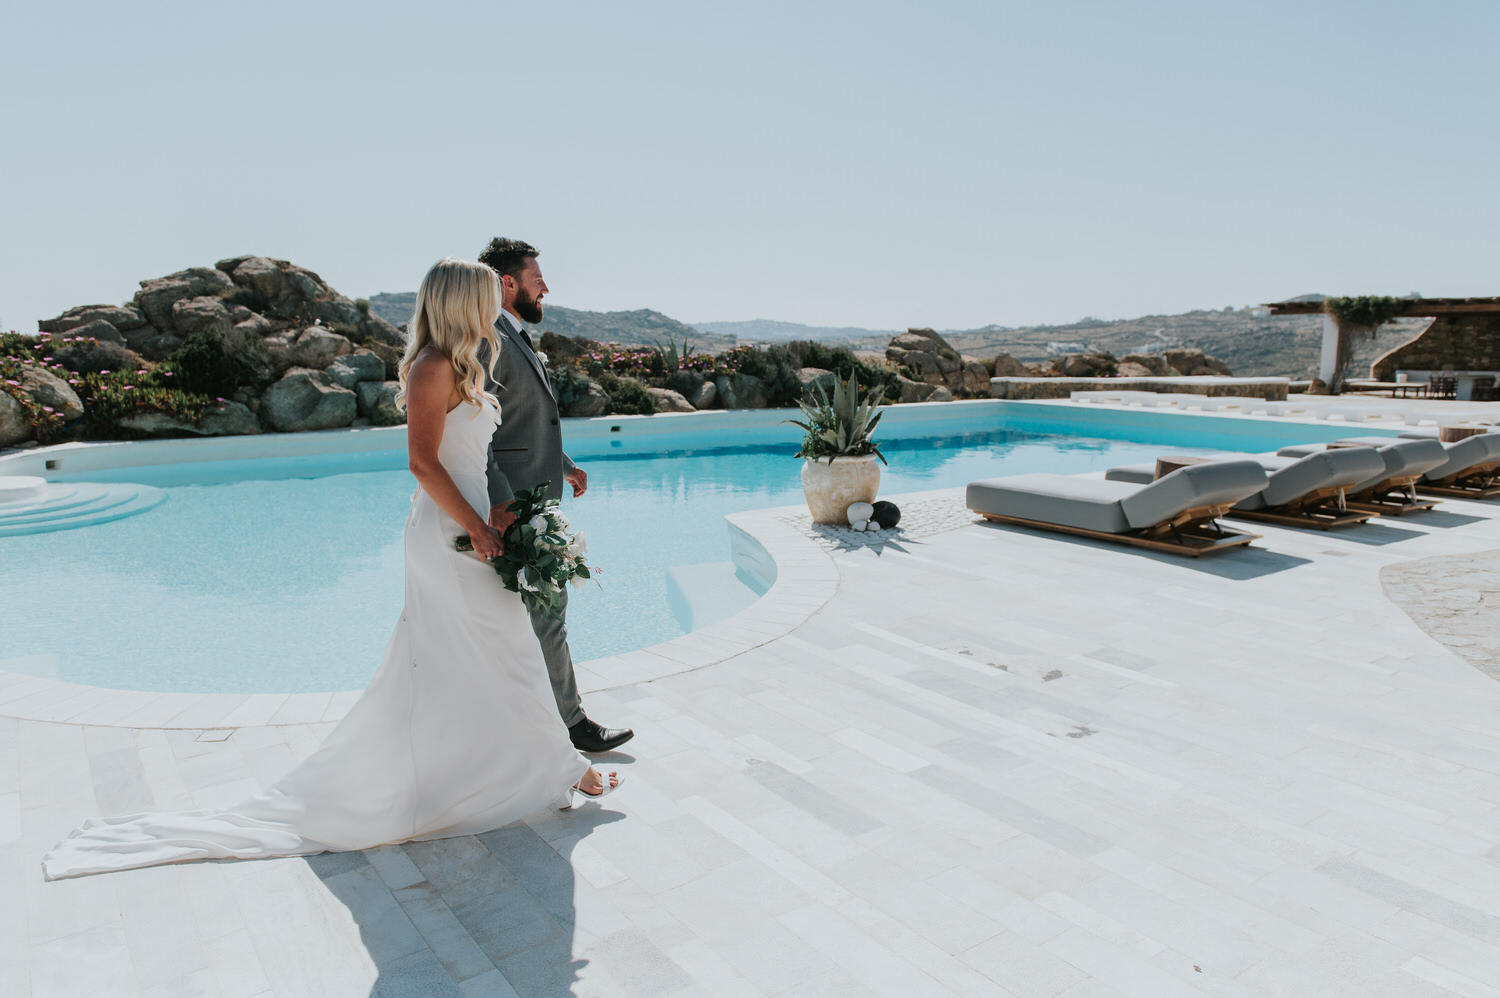 Mykonos wedding photographer: bride and groom walk on the terrace pass the swimming pool with the rocks in the background.